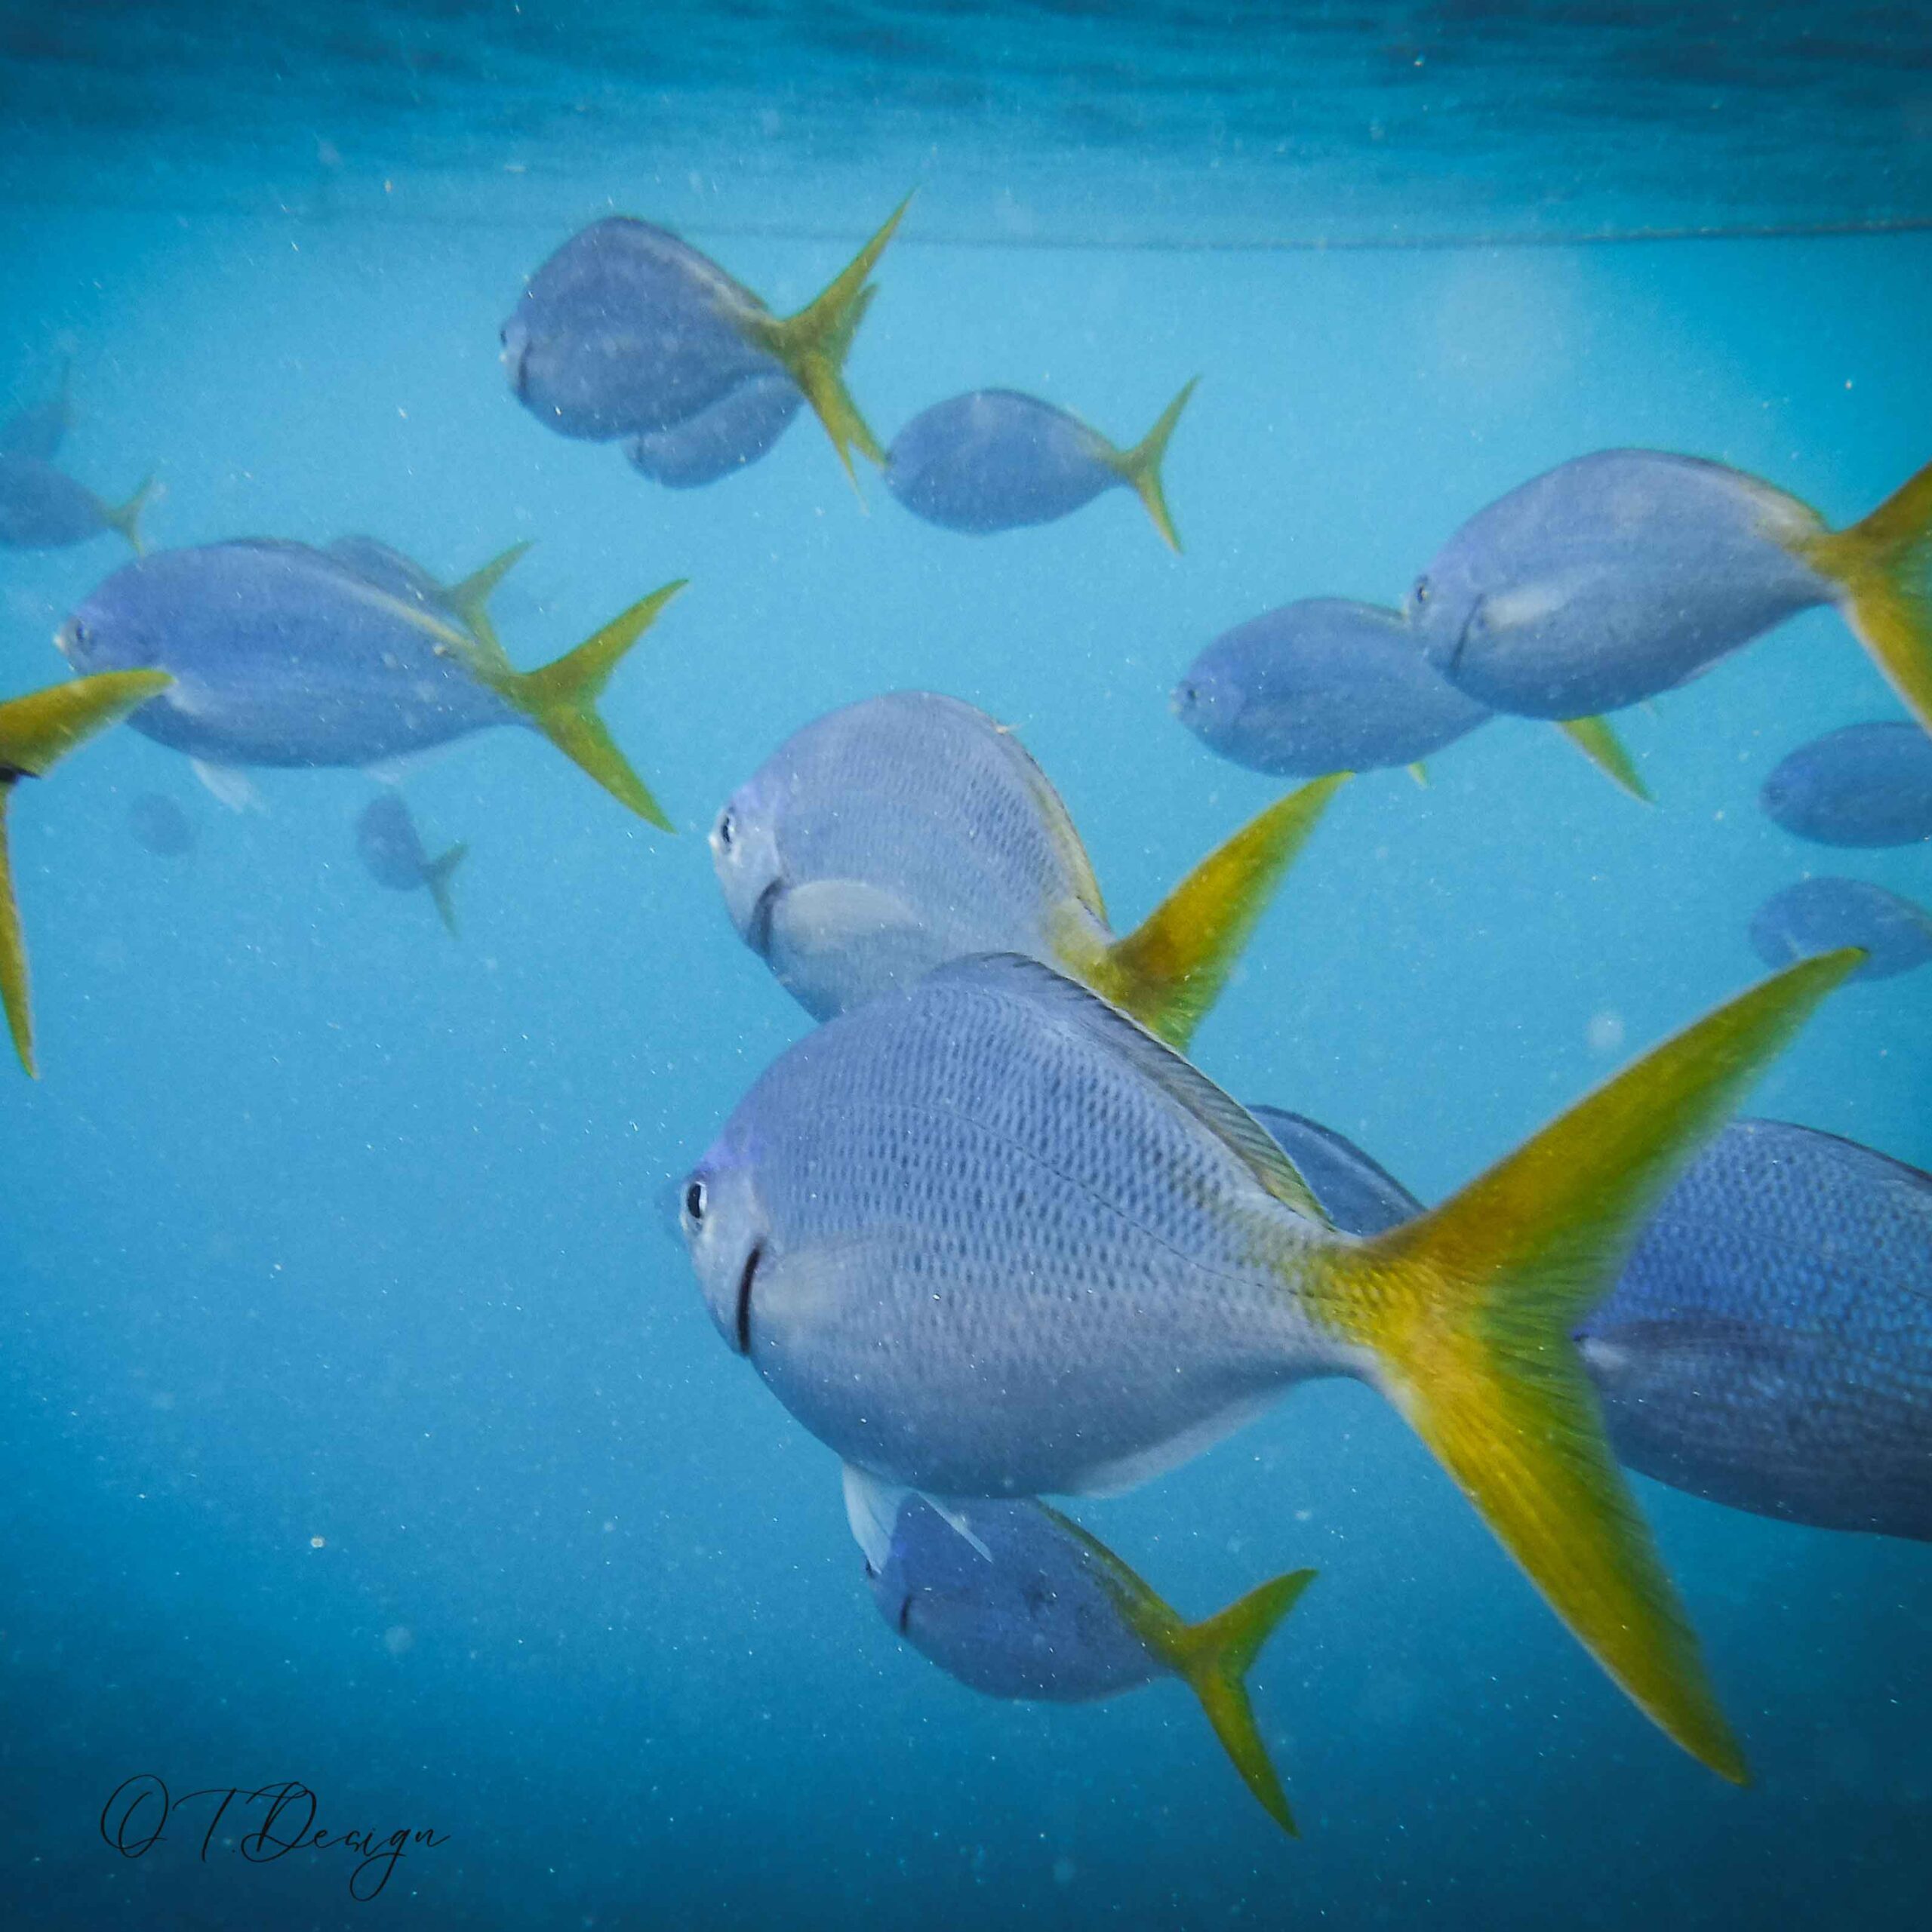 Underwater image of fish swimming at the Grand Barrier Reef, Australia